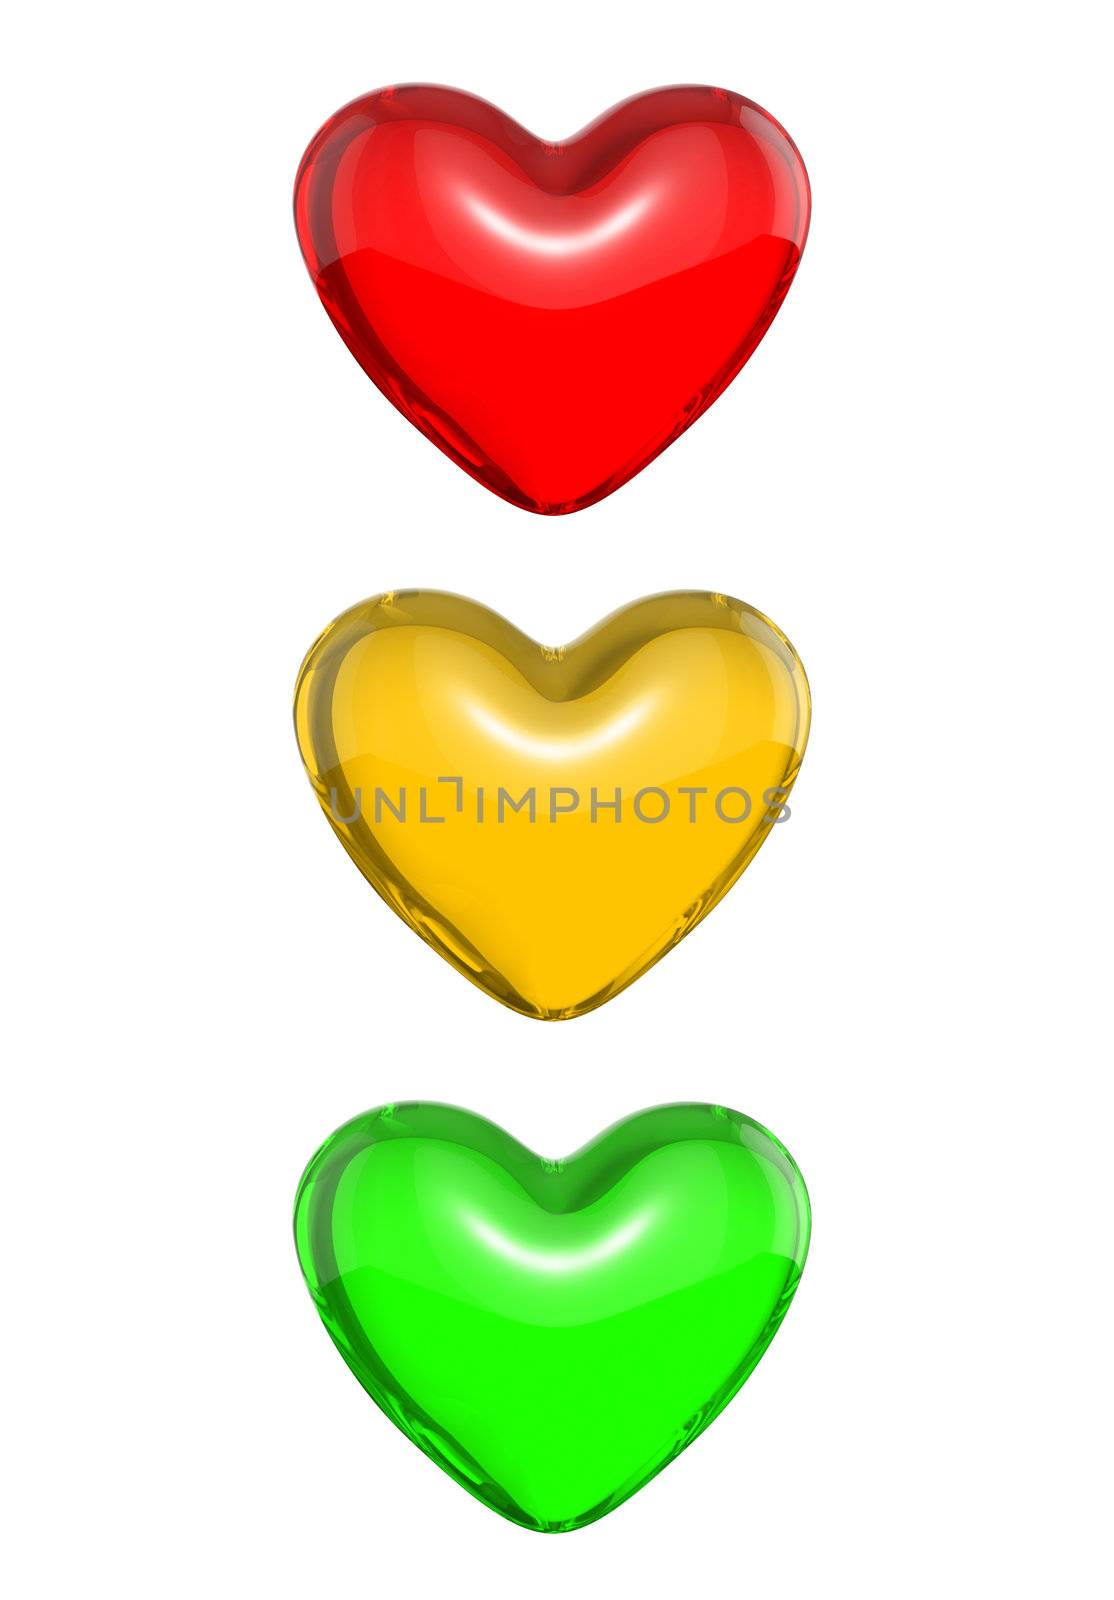 Red candy heart colored as traffic light, isolated on white background